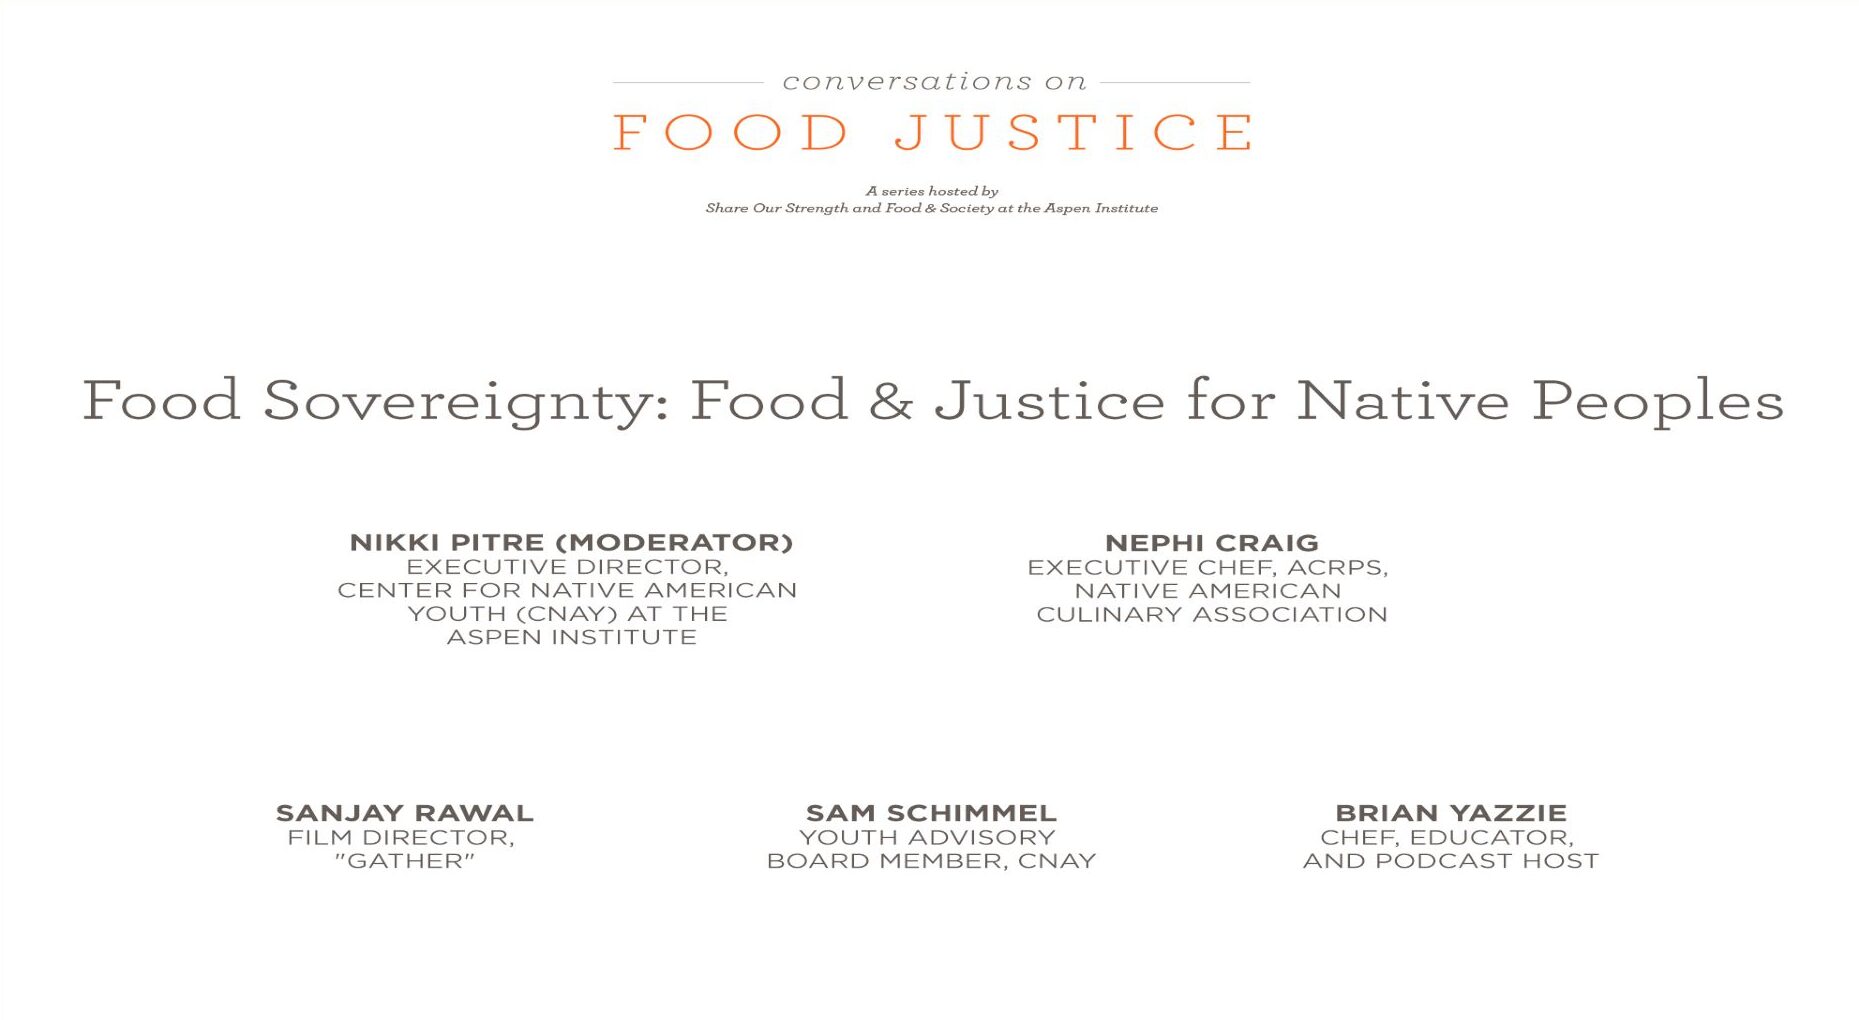 Food Sovereignty: Food and Justice for Native Peoples